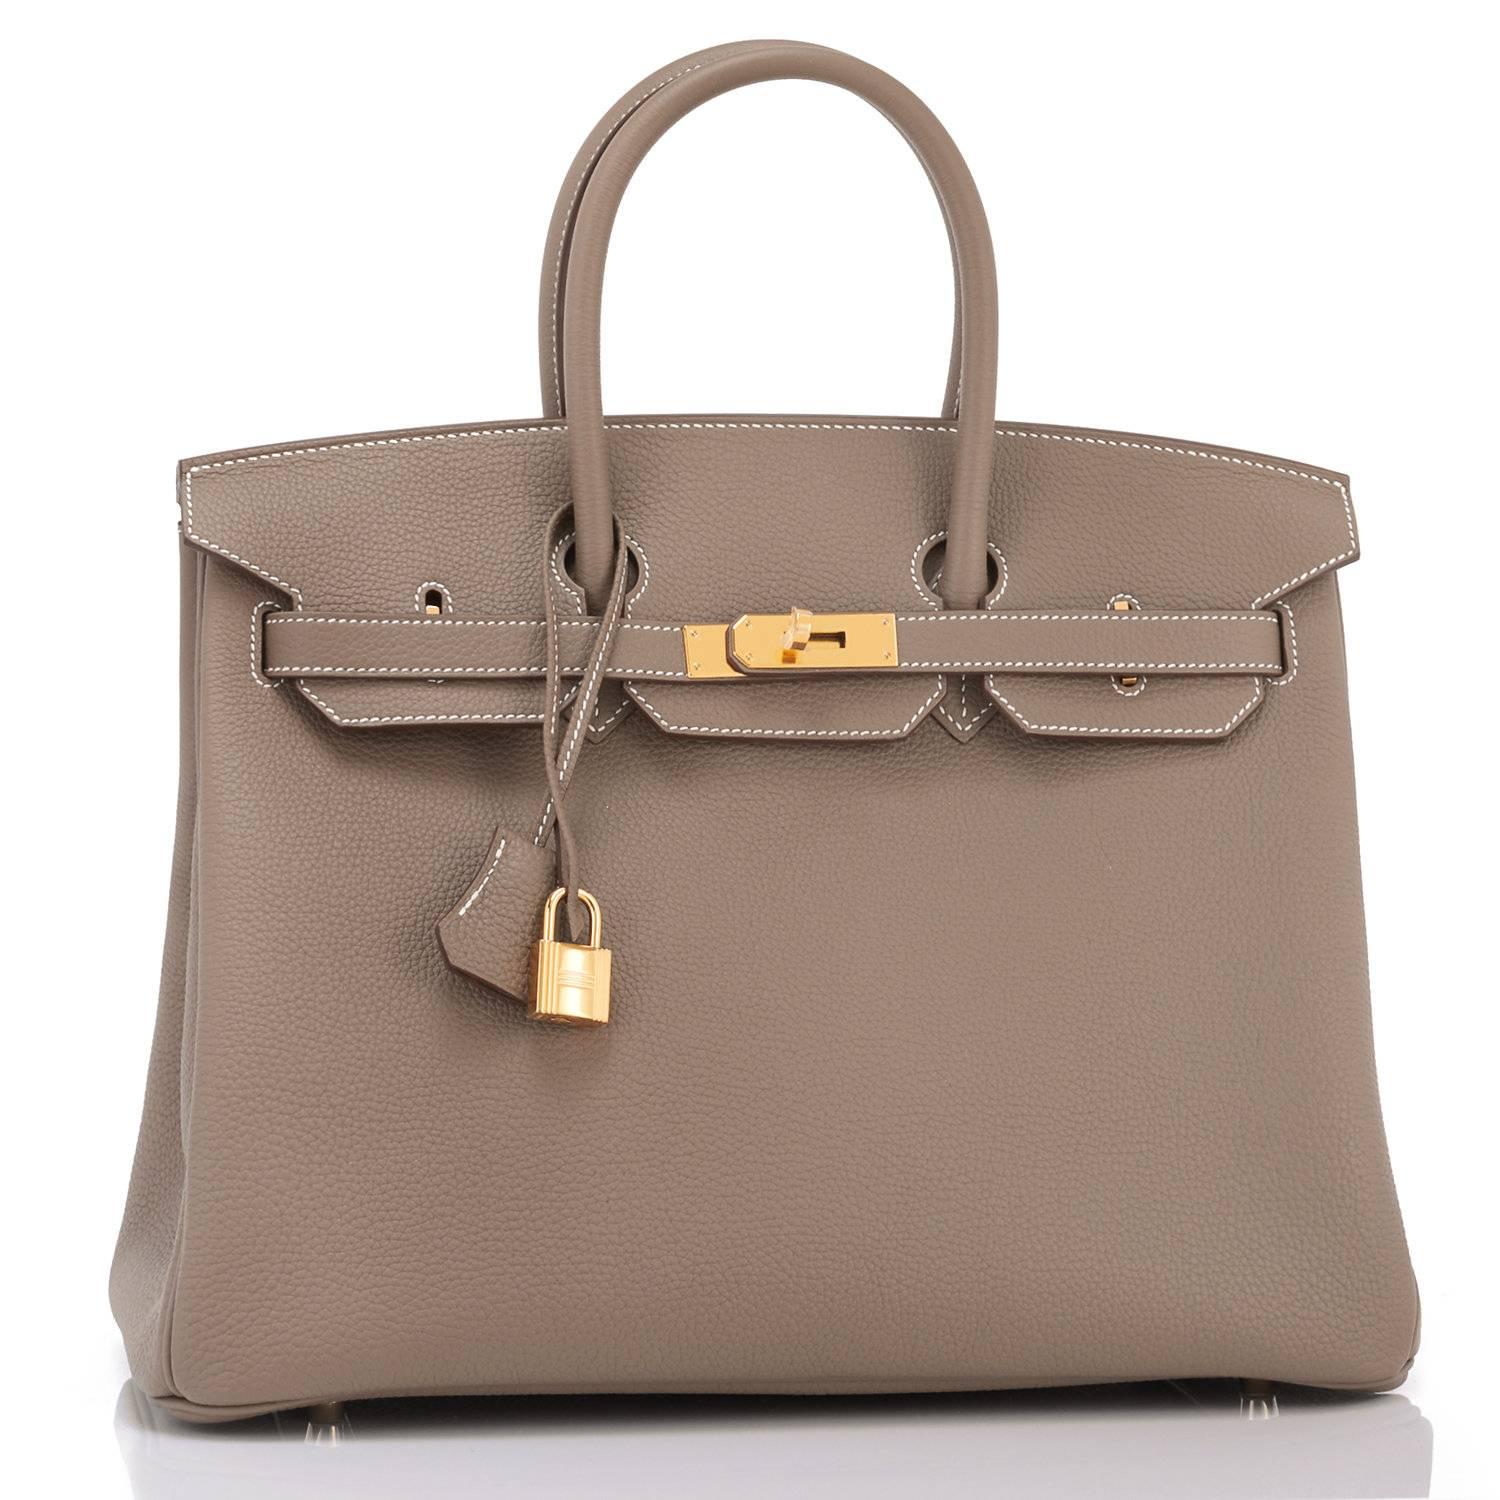 Hermes Etoupe Togo 35cm Birkin Gold Hardware 
Brand New in Box. Store fresh. Pristine Condition (with plastic on hardware). 
Perfect gift! Comes in full set with lock, keys, clochette, sleeper, raincoat, and orange Hermes box.
This is the elegant